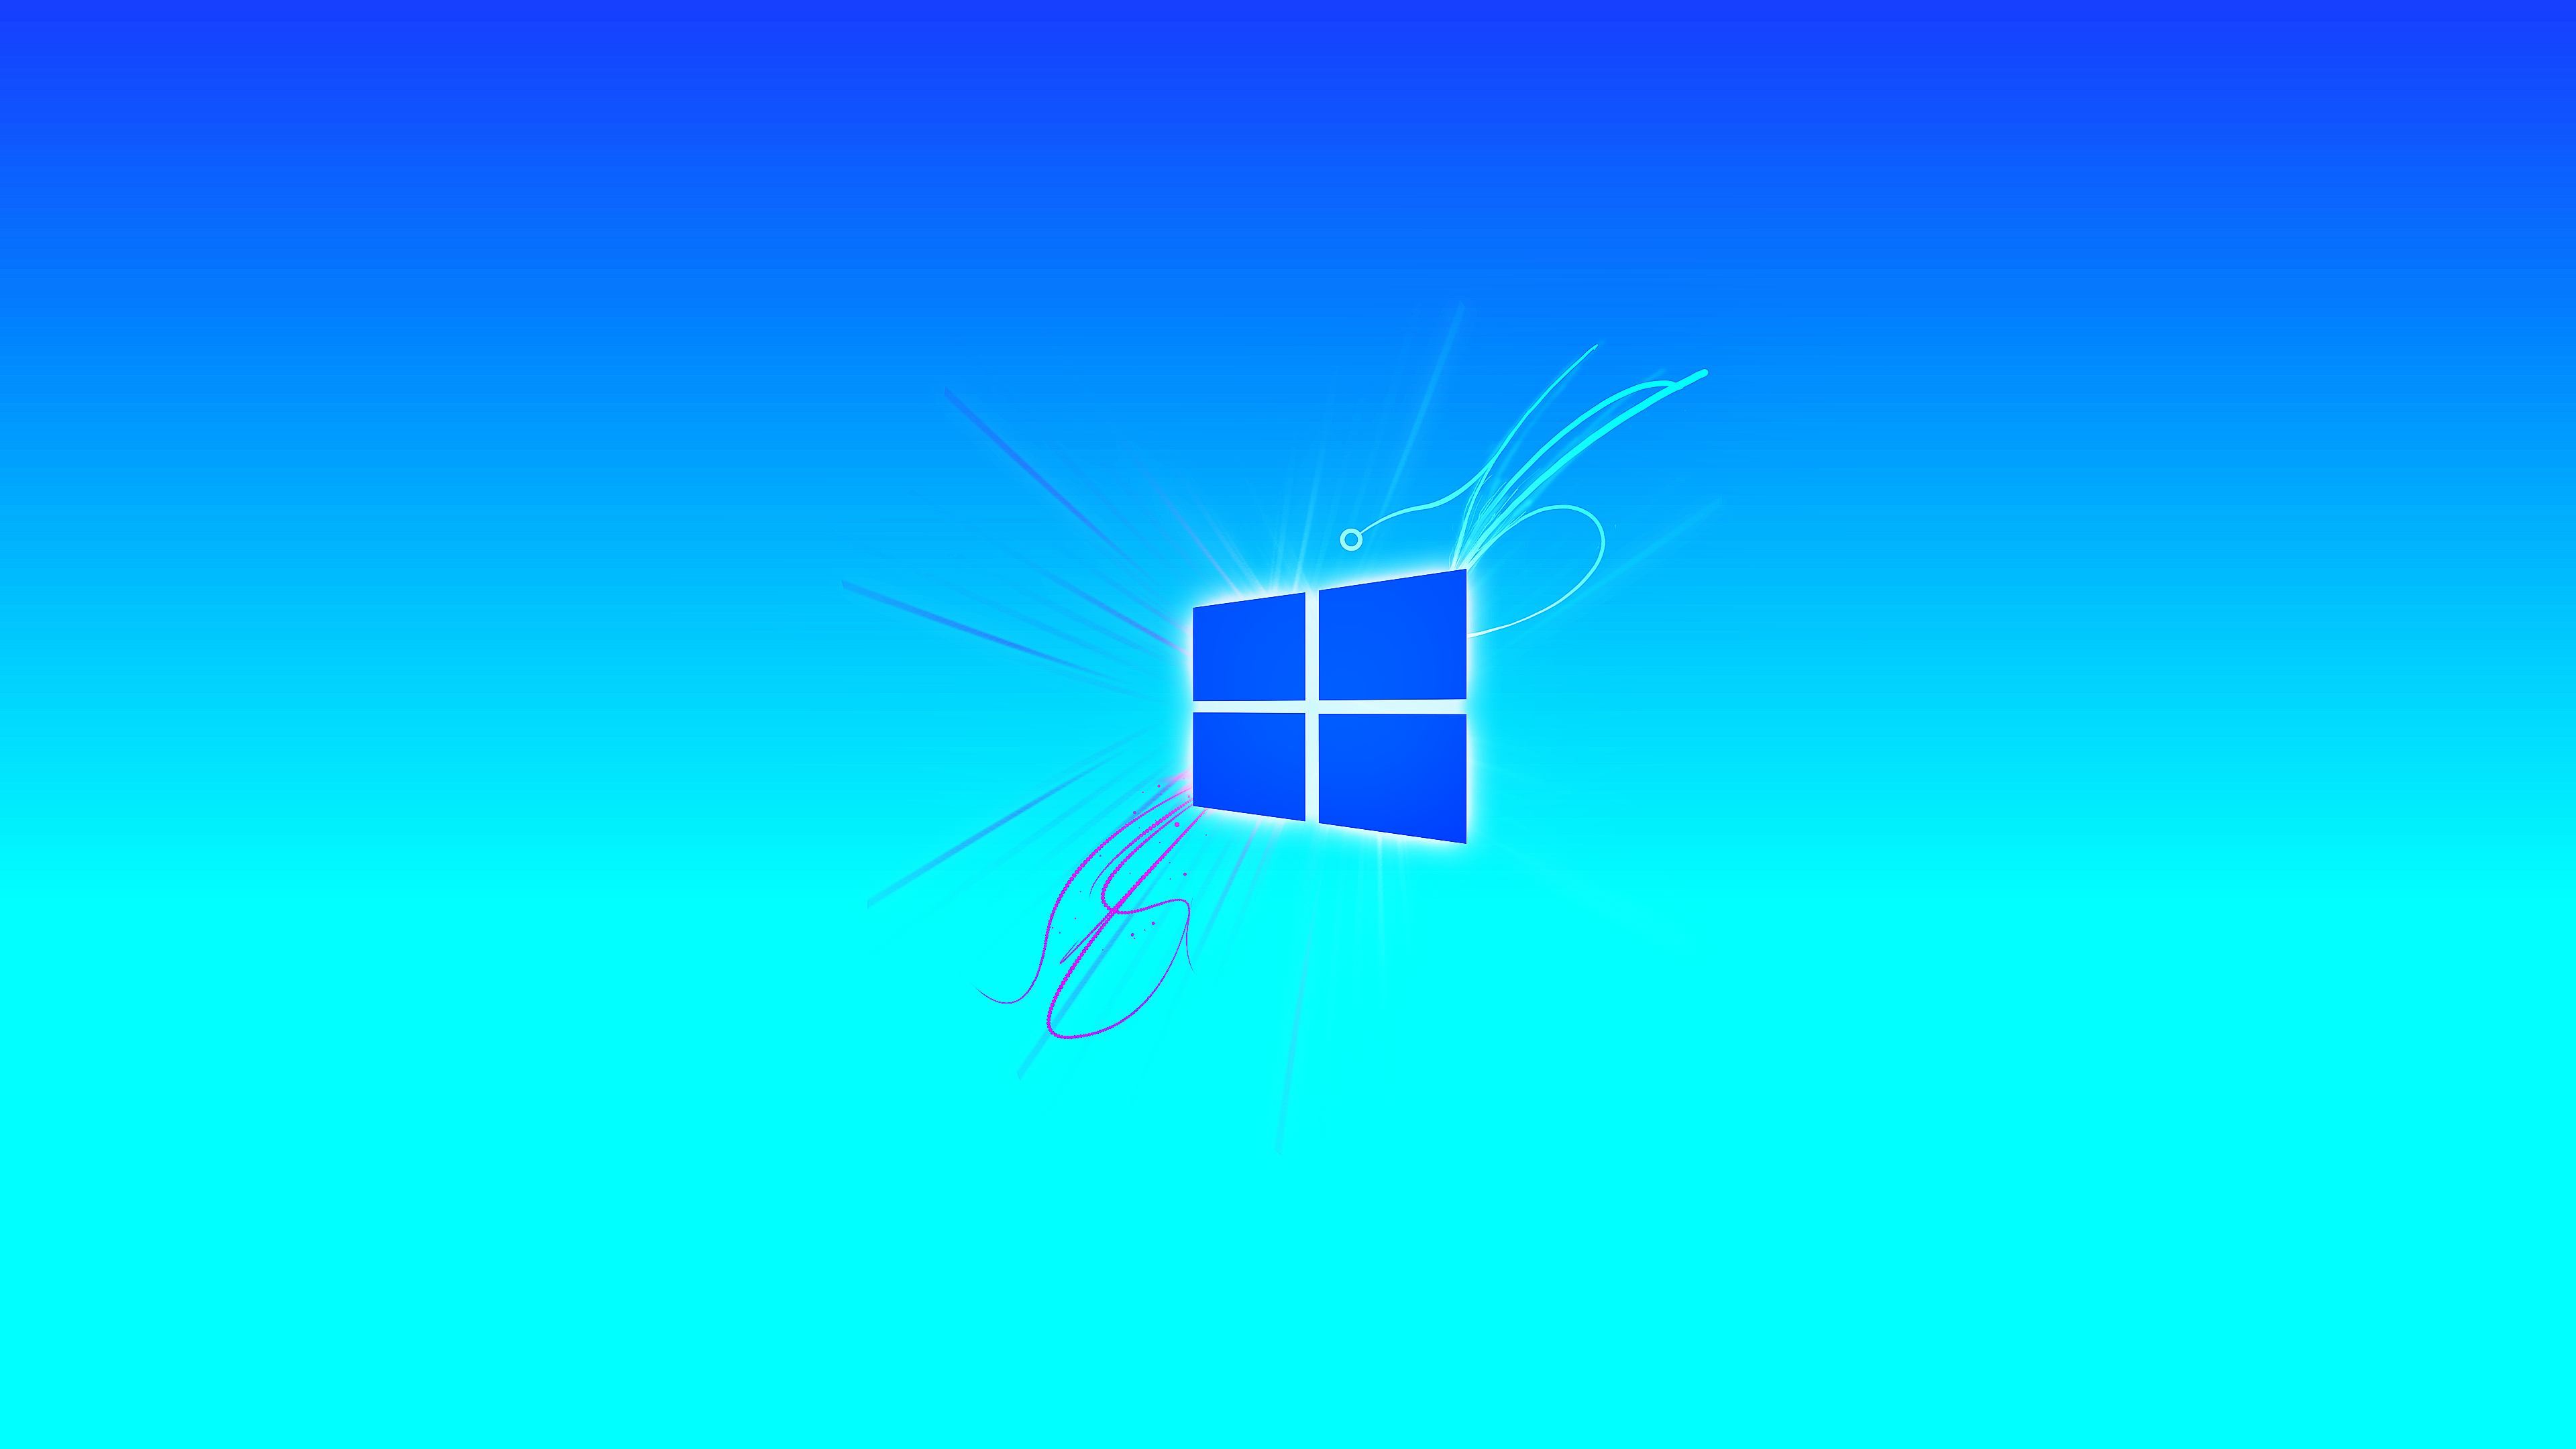 General 3840x2160 abstract minimalism operating system neon Microsoft Windows cyan logo simple background gradient